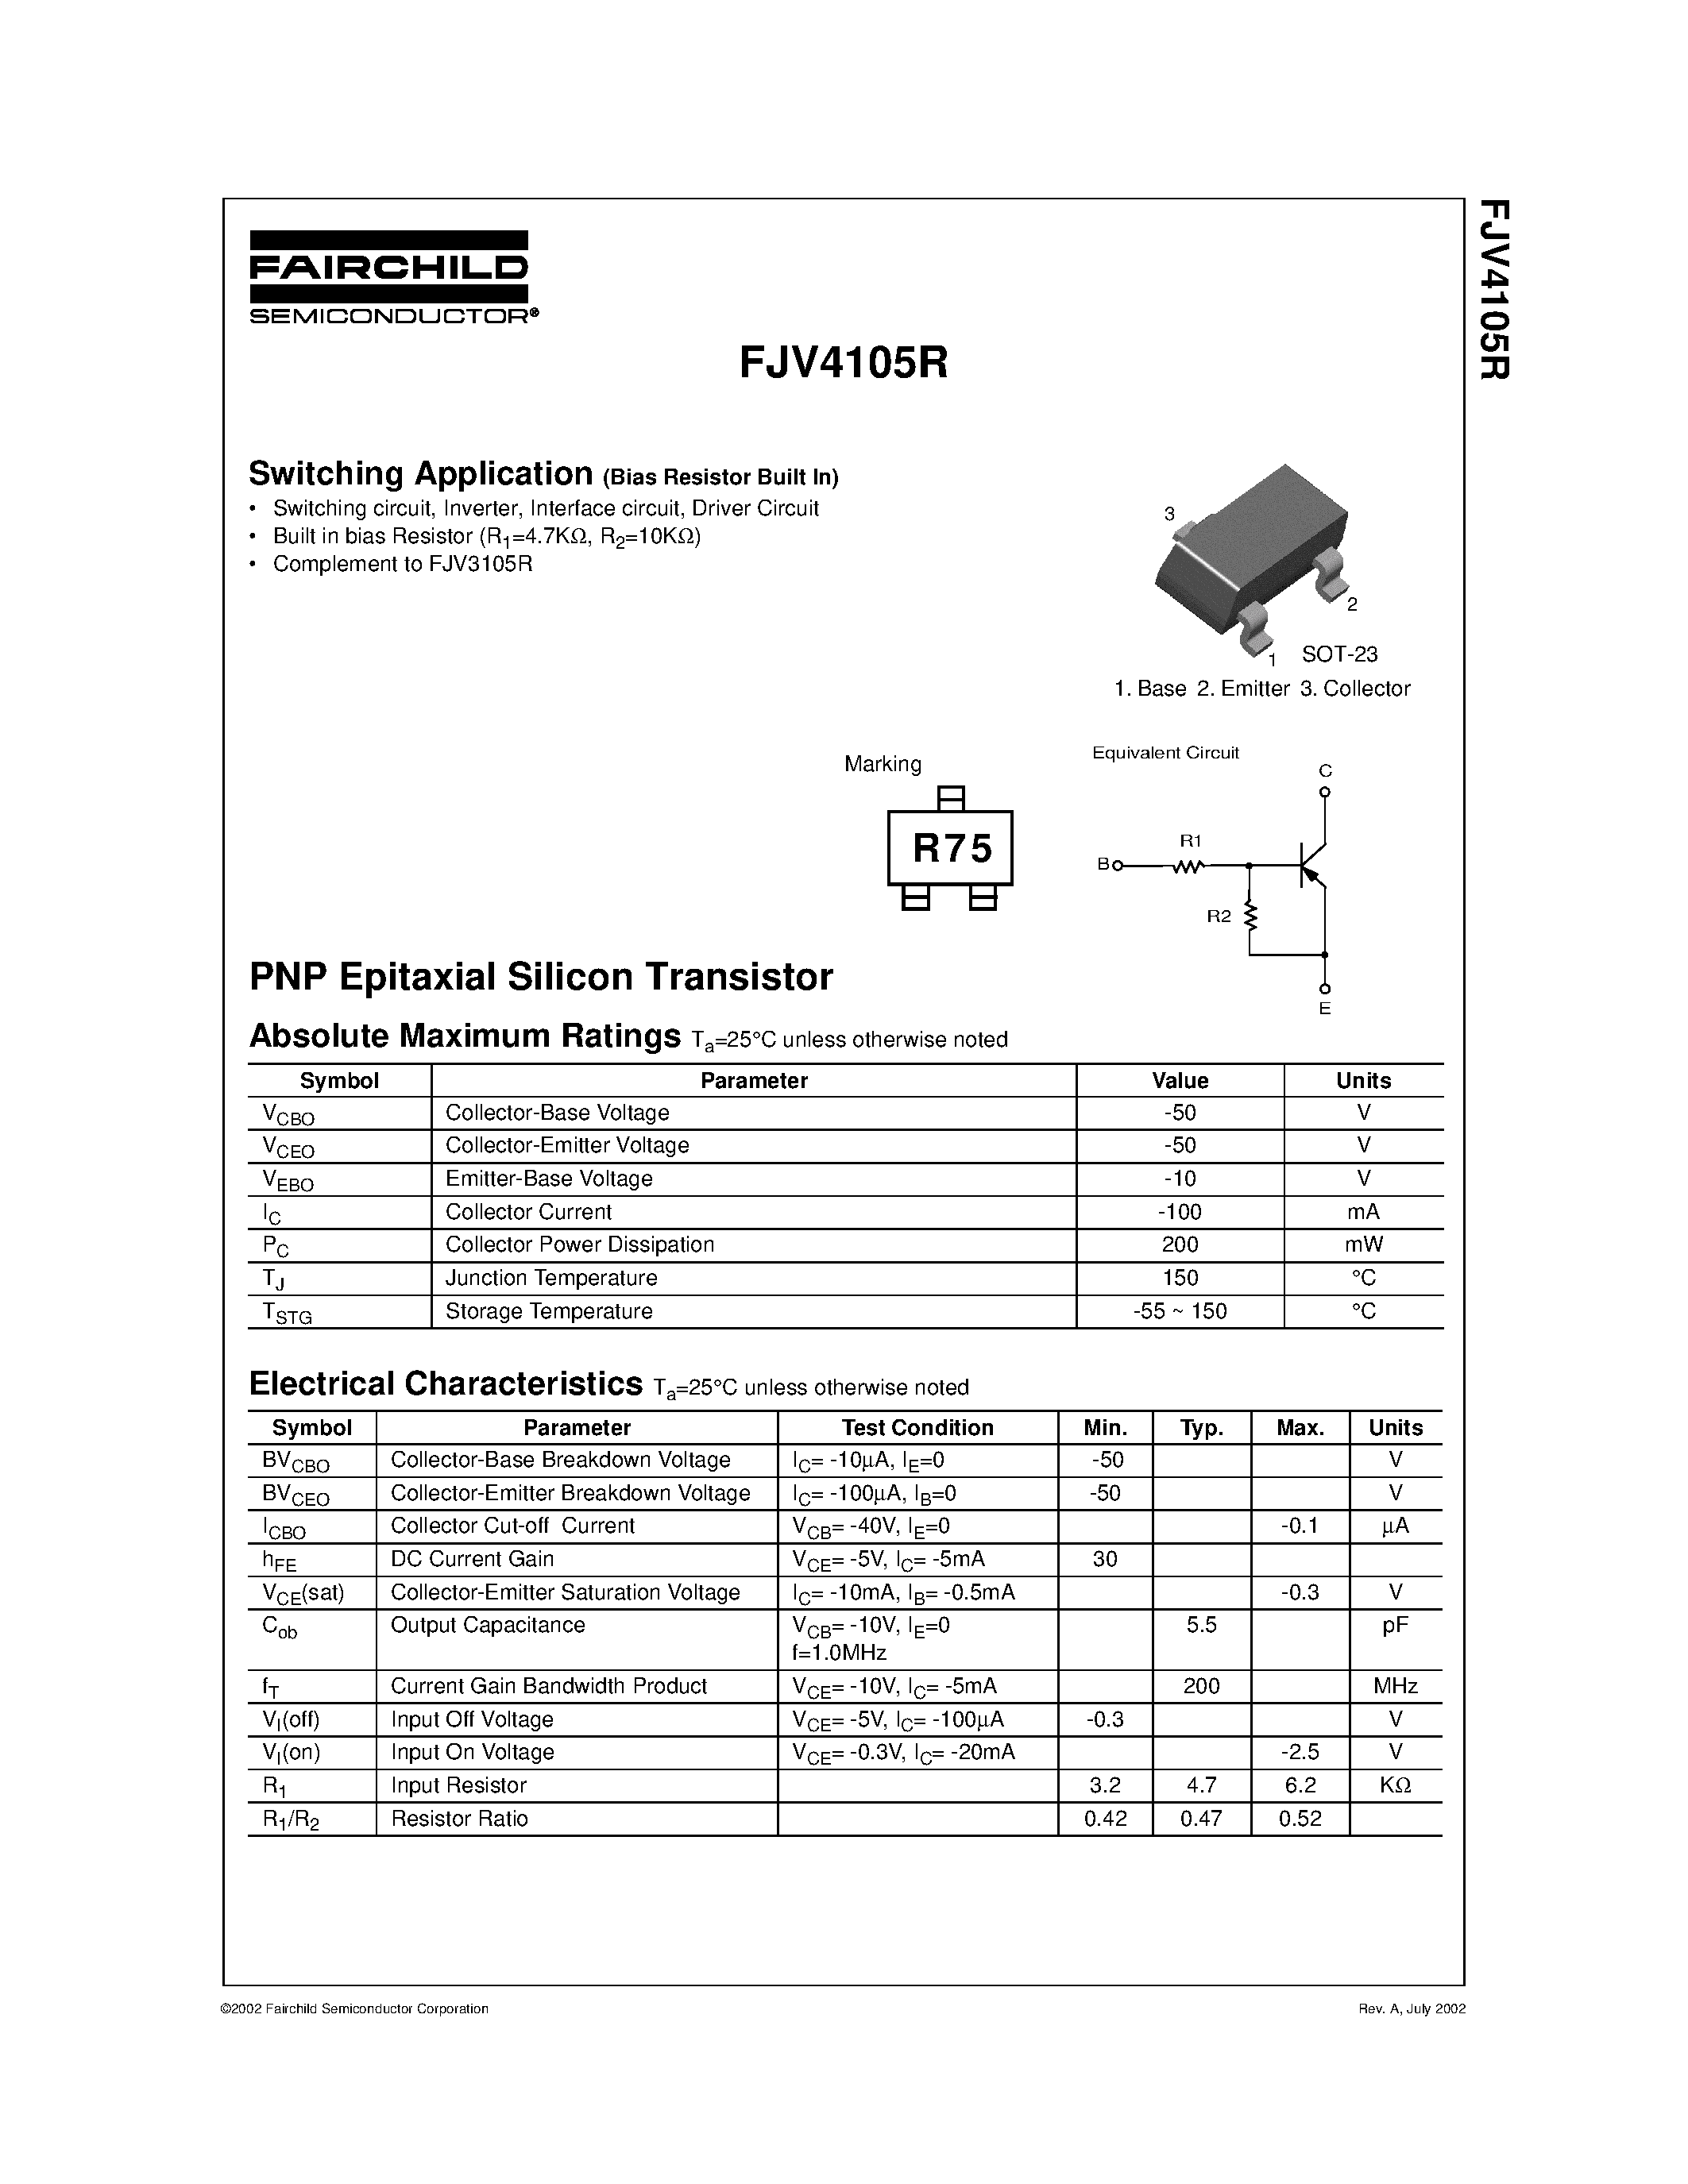 Datasheet FJV4105R - PNP Epitaxial Silicon Transistor page 1